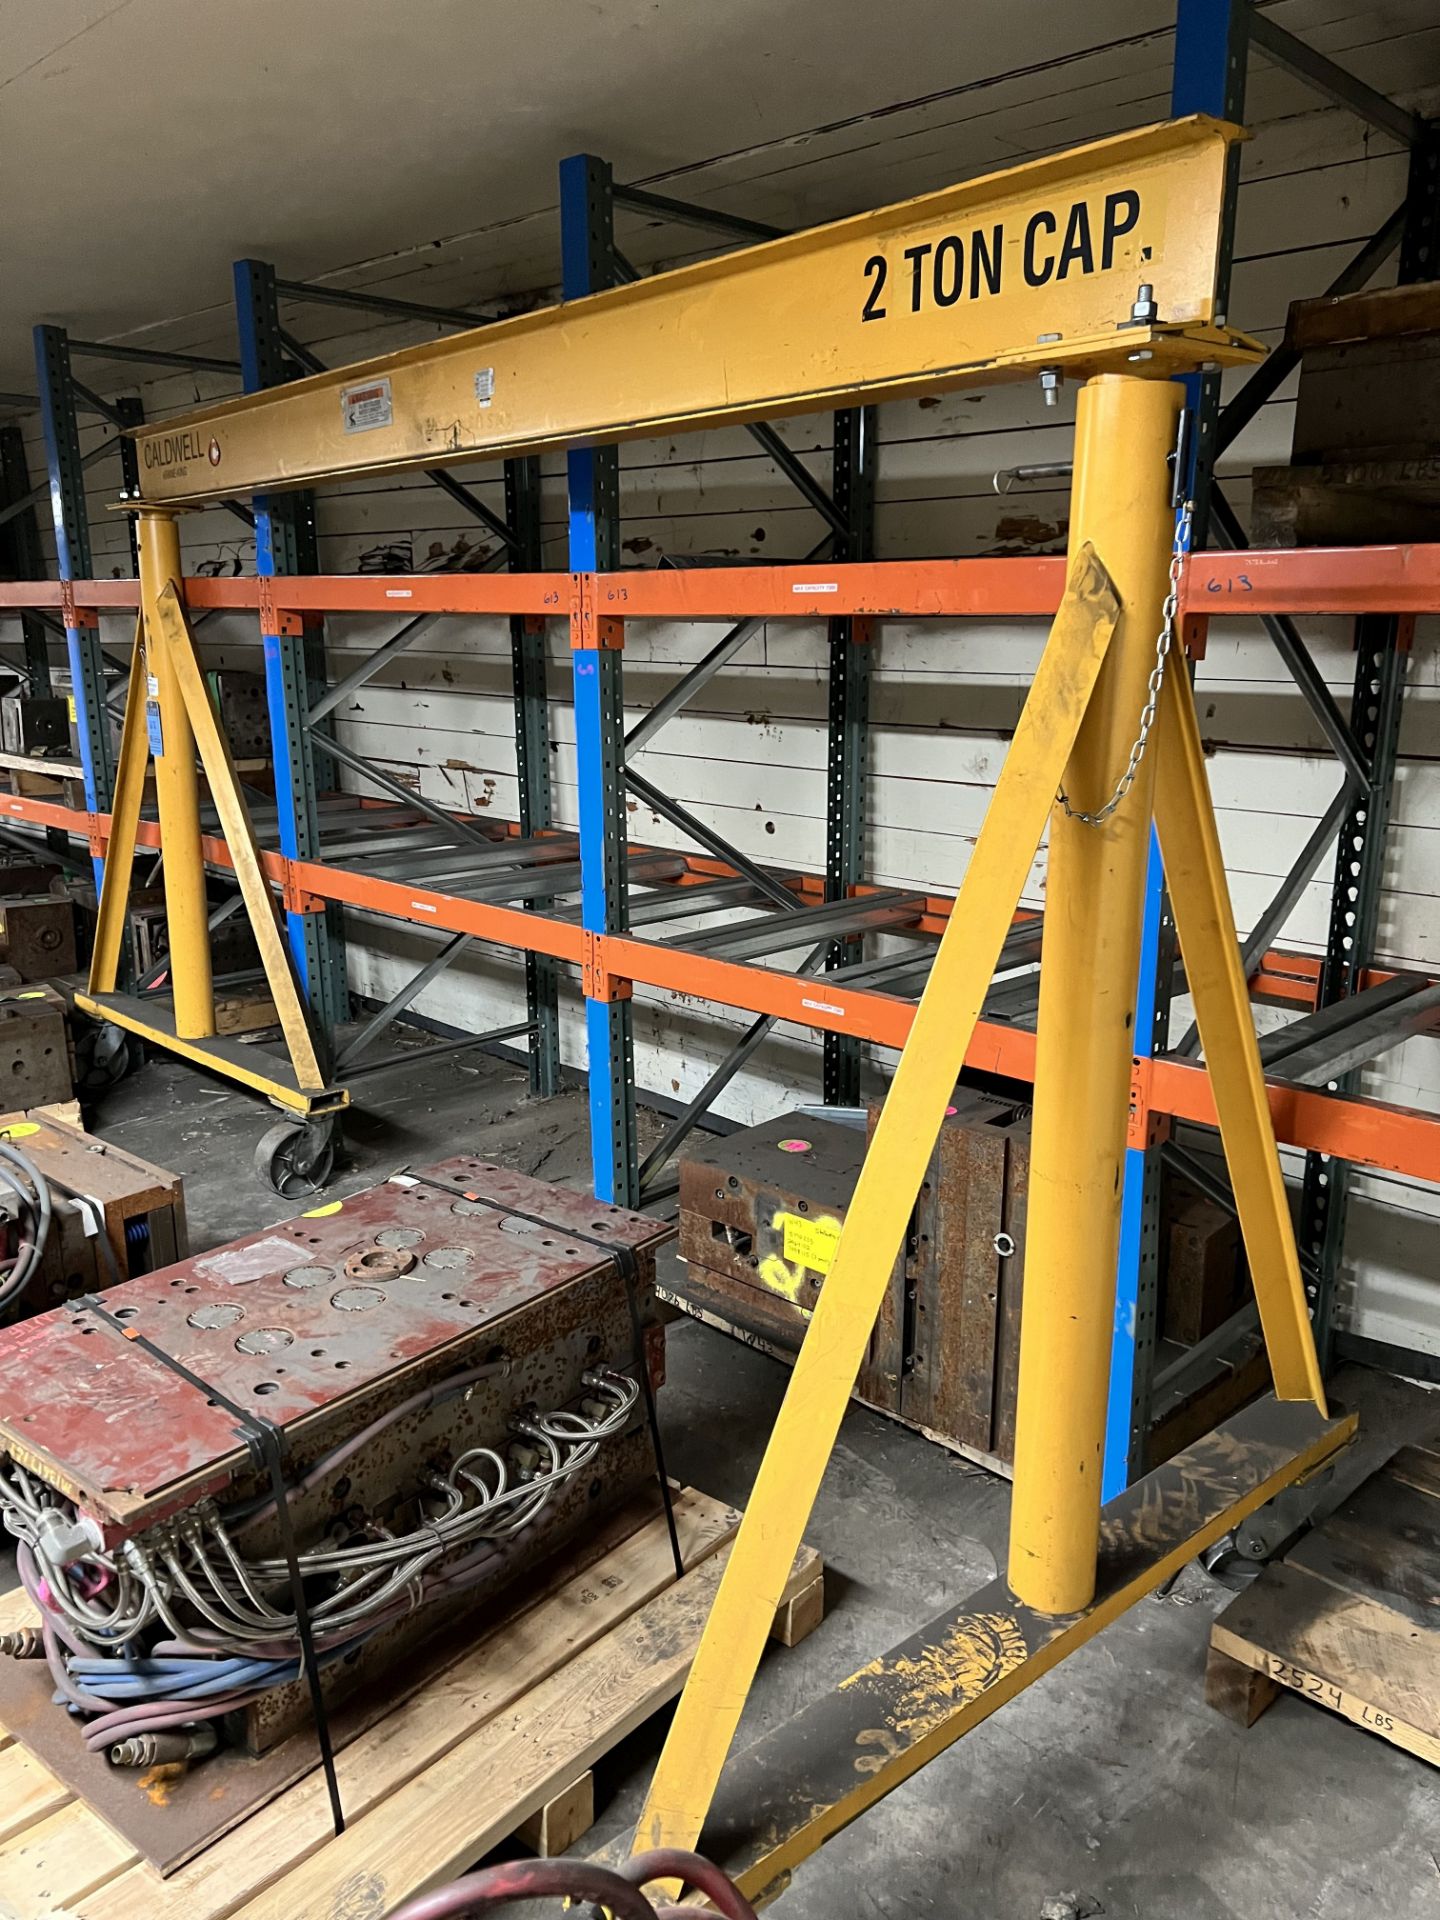 2 TON CALDWELL ROLLING HOIST BOOM, NO HOIST **LOCATED AT 20090 GIBSON, GALESVILLE, WI - TWO BLOCKS